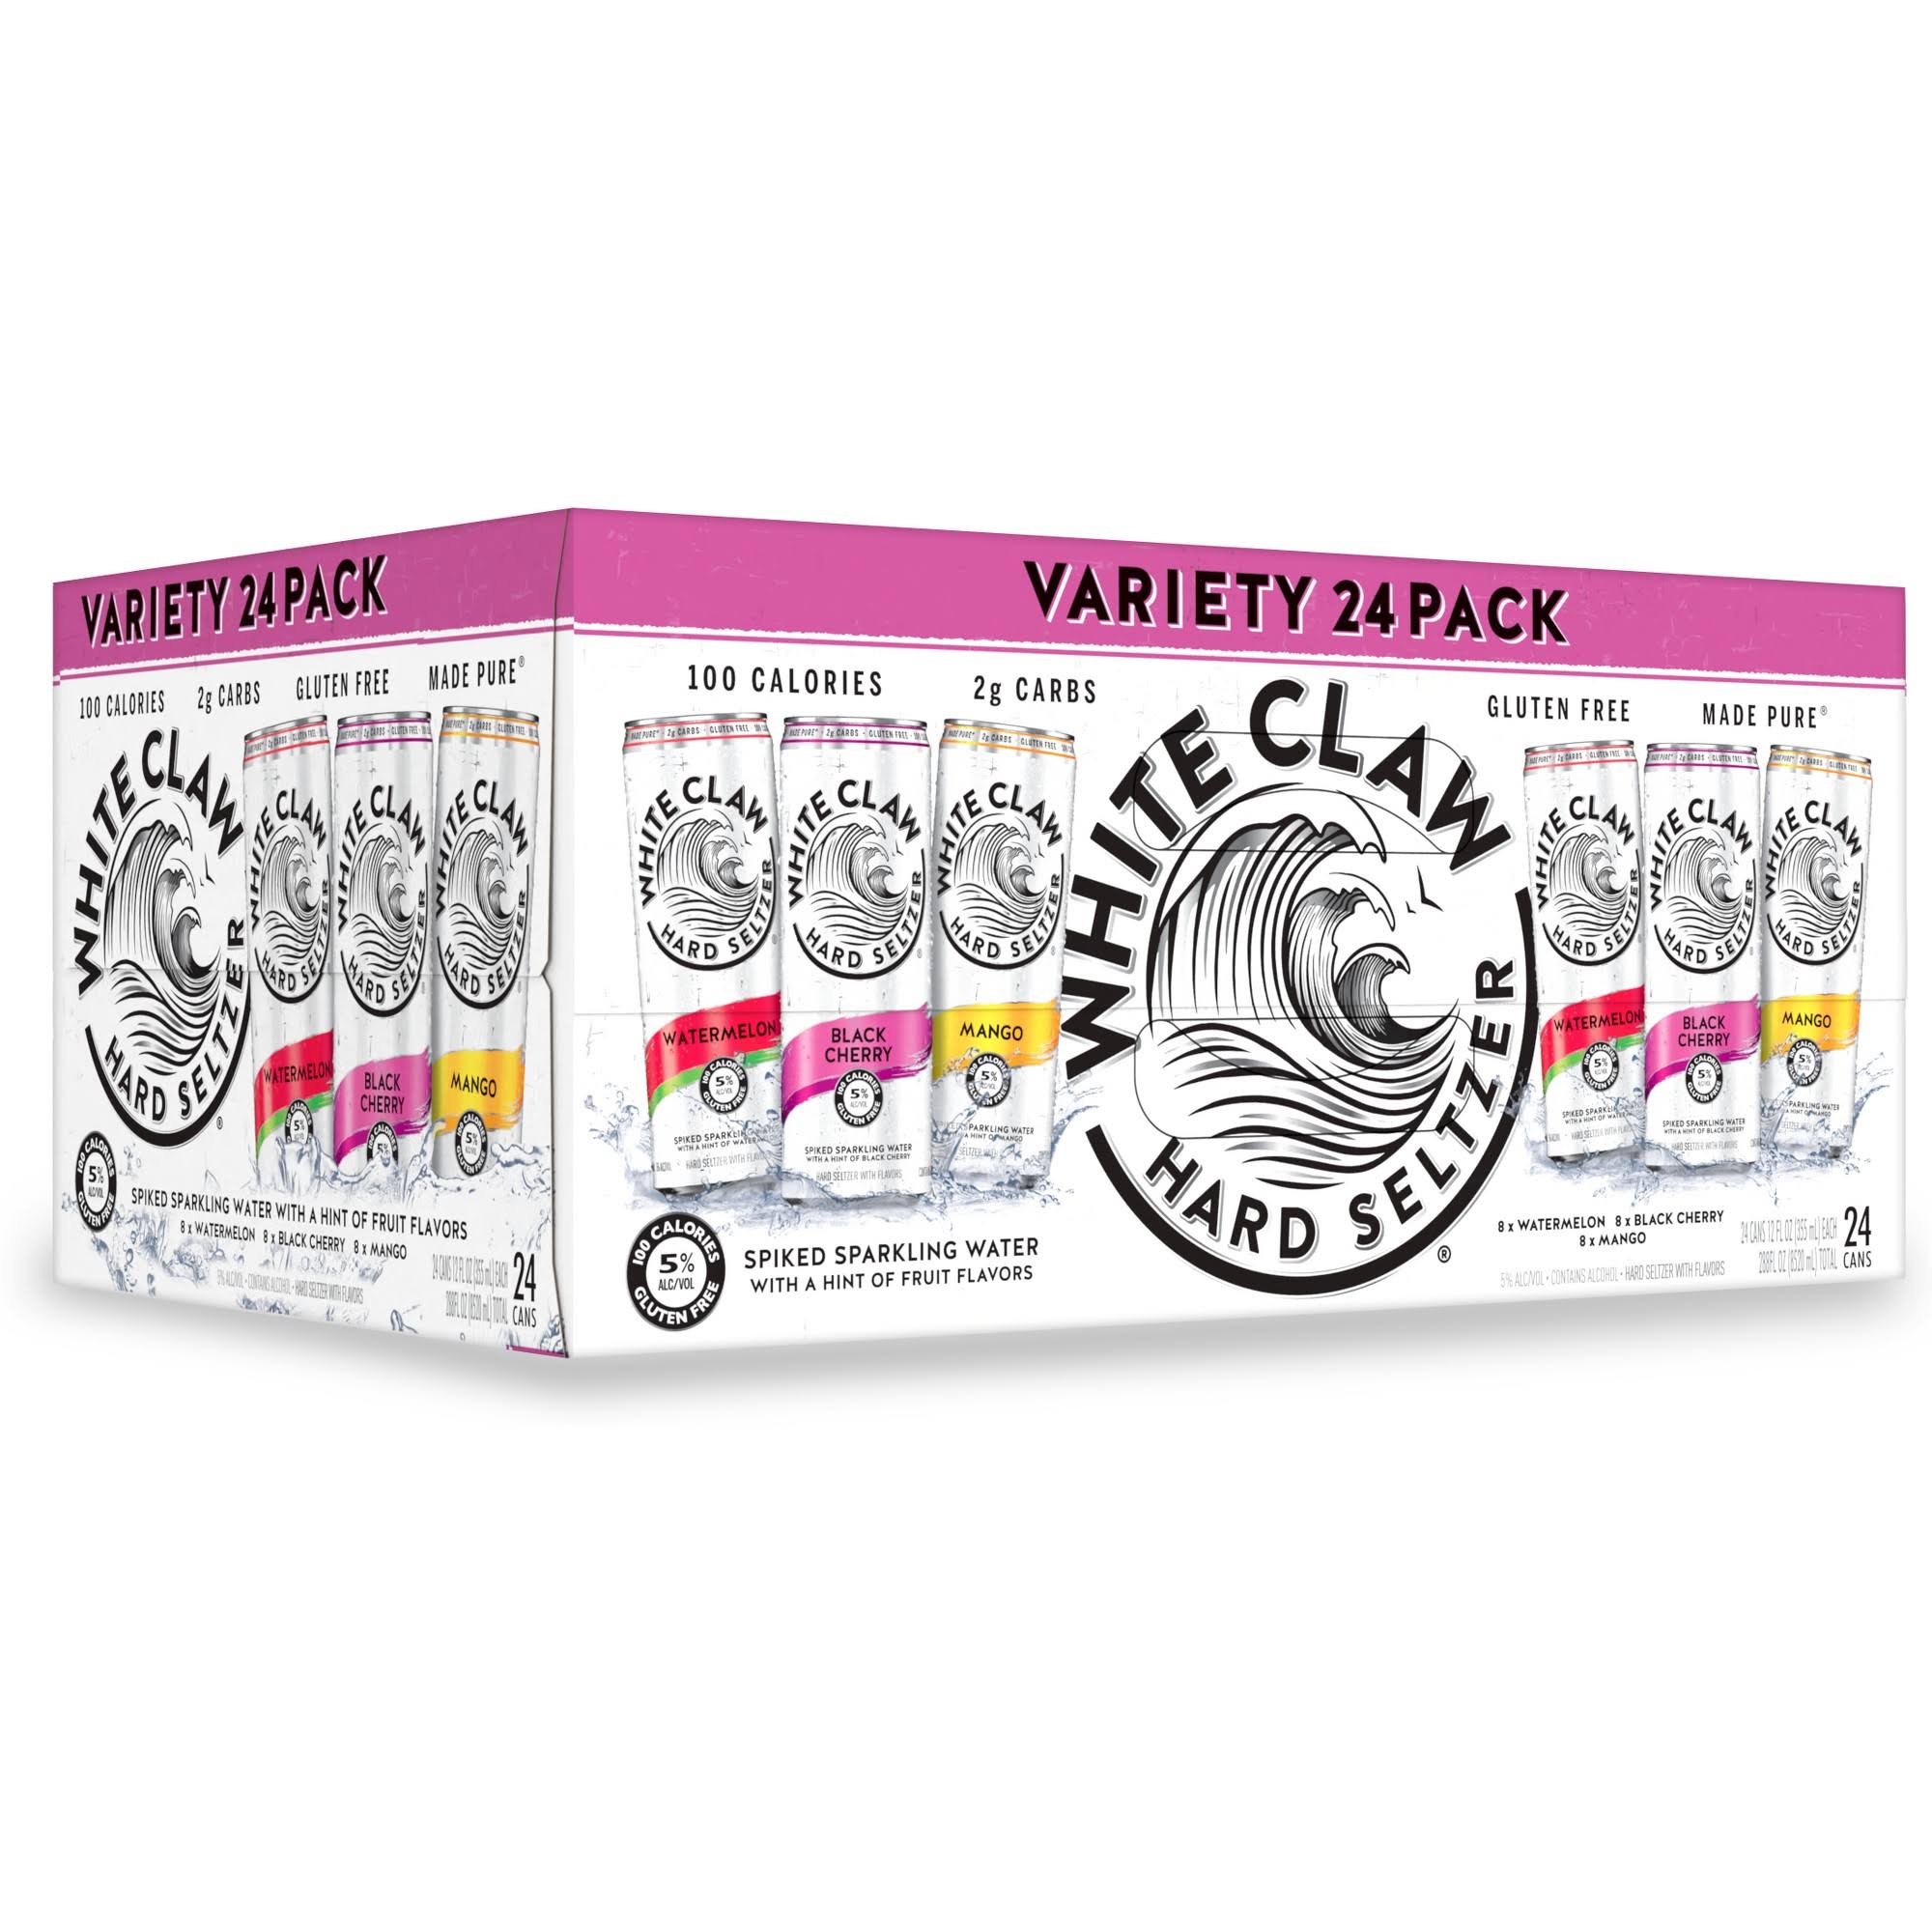 White Claw Hard Seltzer, Variety 24 Pack - 24 pack, 12 fl oz cans